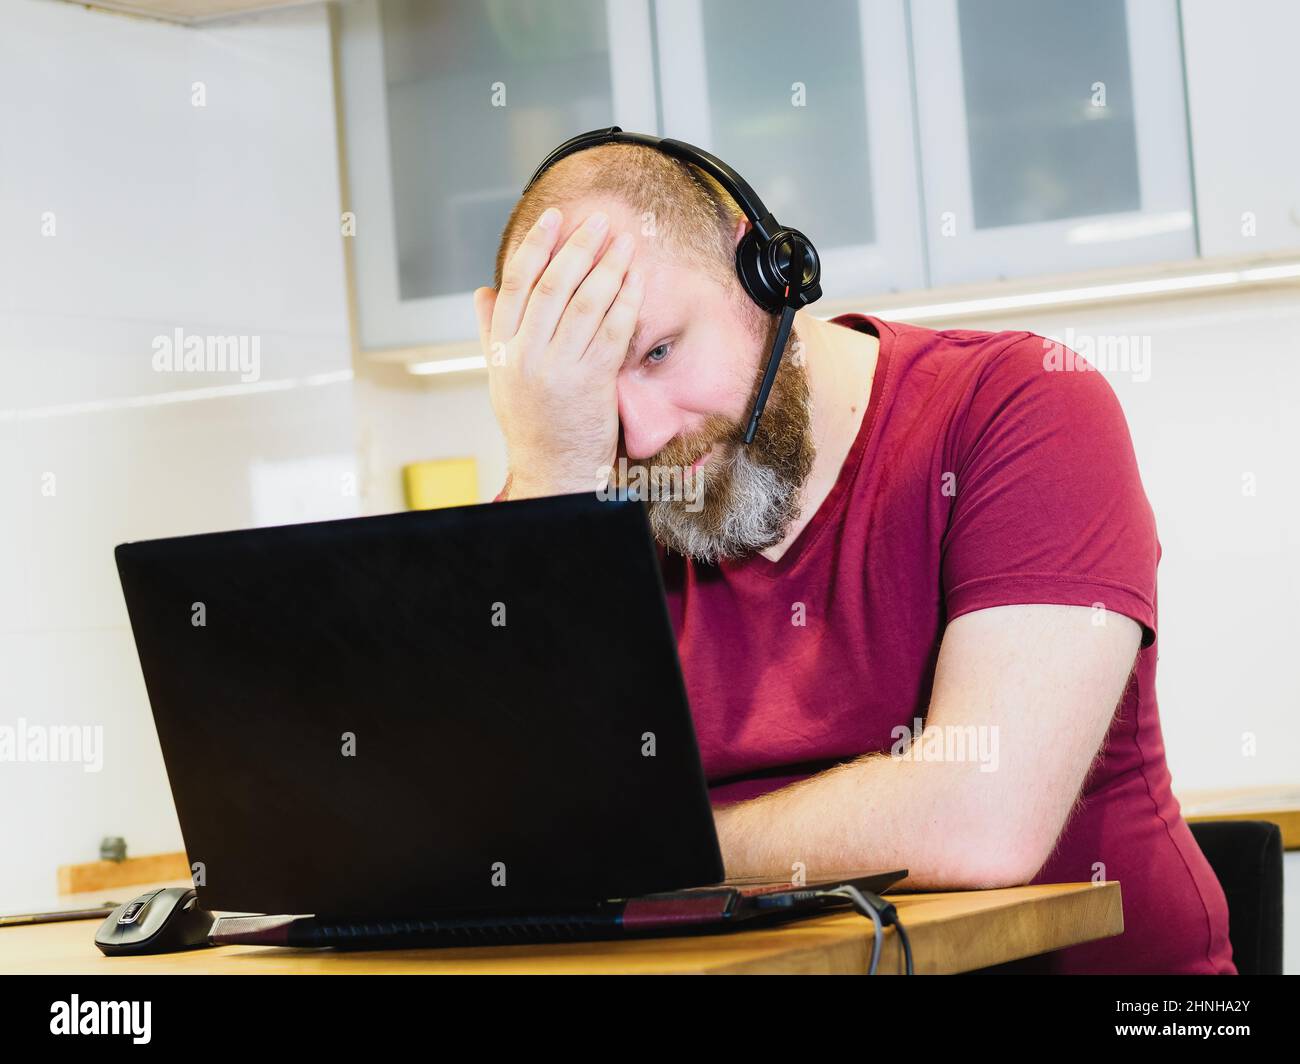 Tired adult person holding head with hand, mature man in headset working from home using laptop and providing online meeting, remote job concept Stock Photo